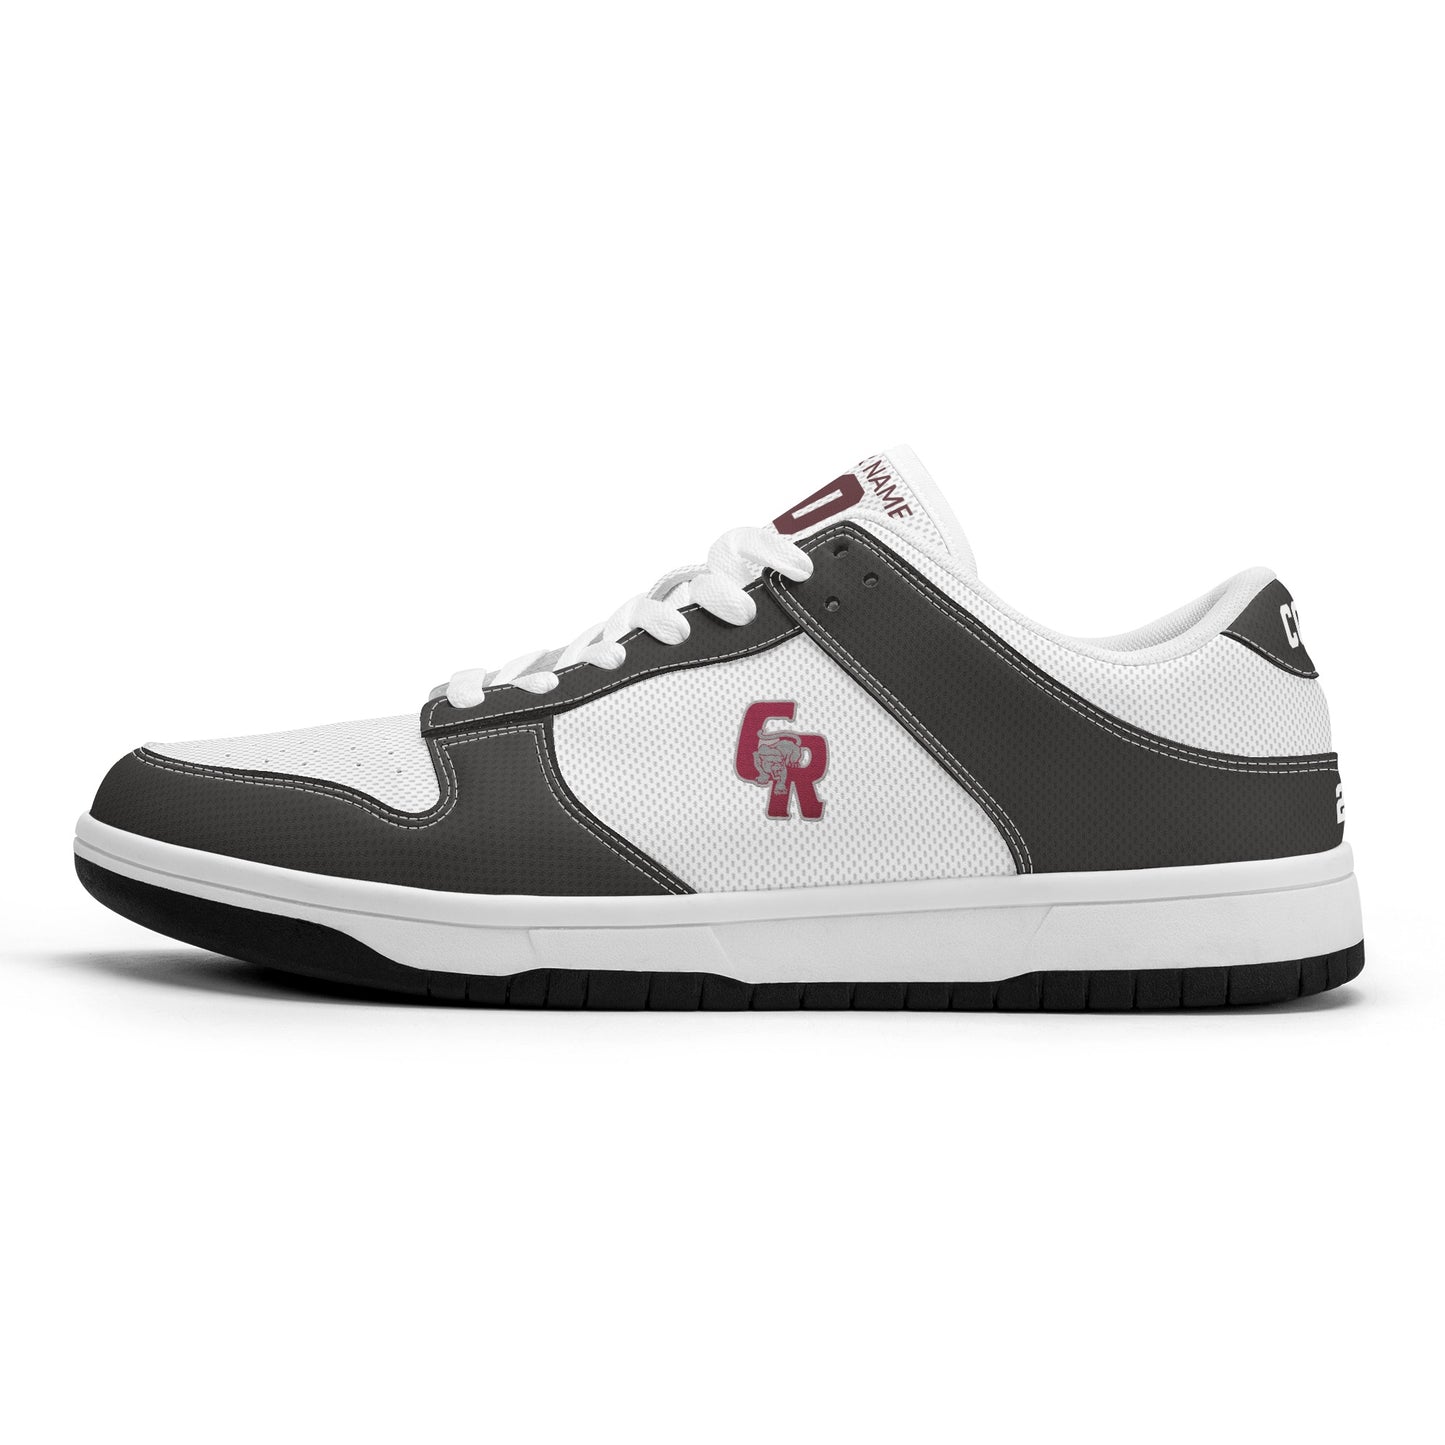 CRHS - Men's Dunk-Style Low Top Leather Sneakers